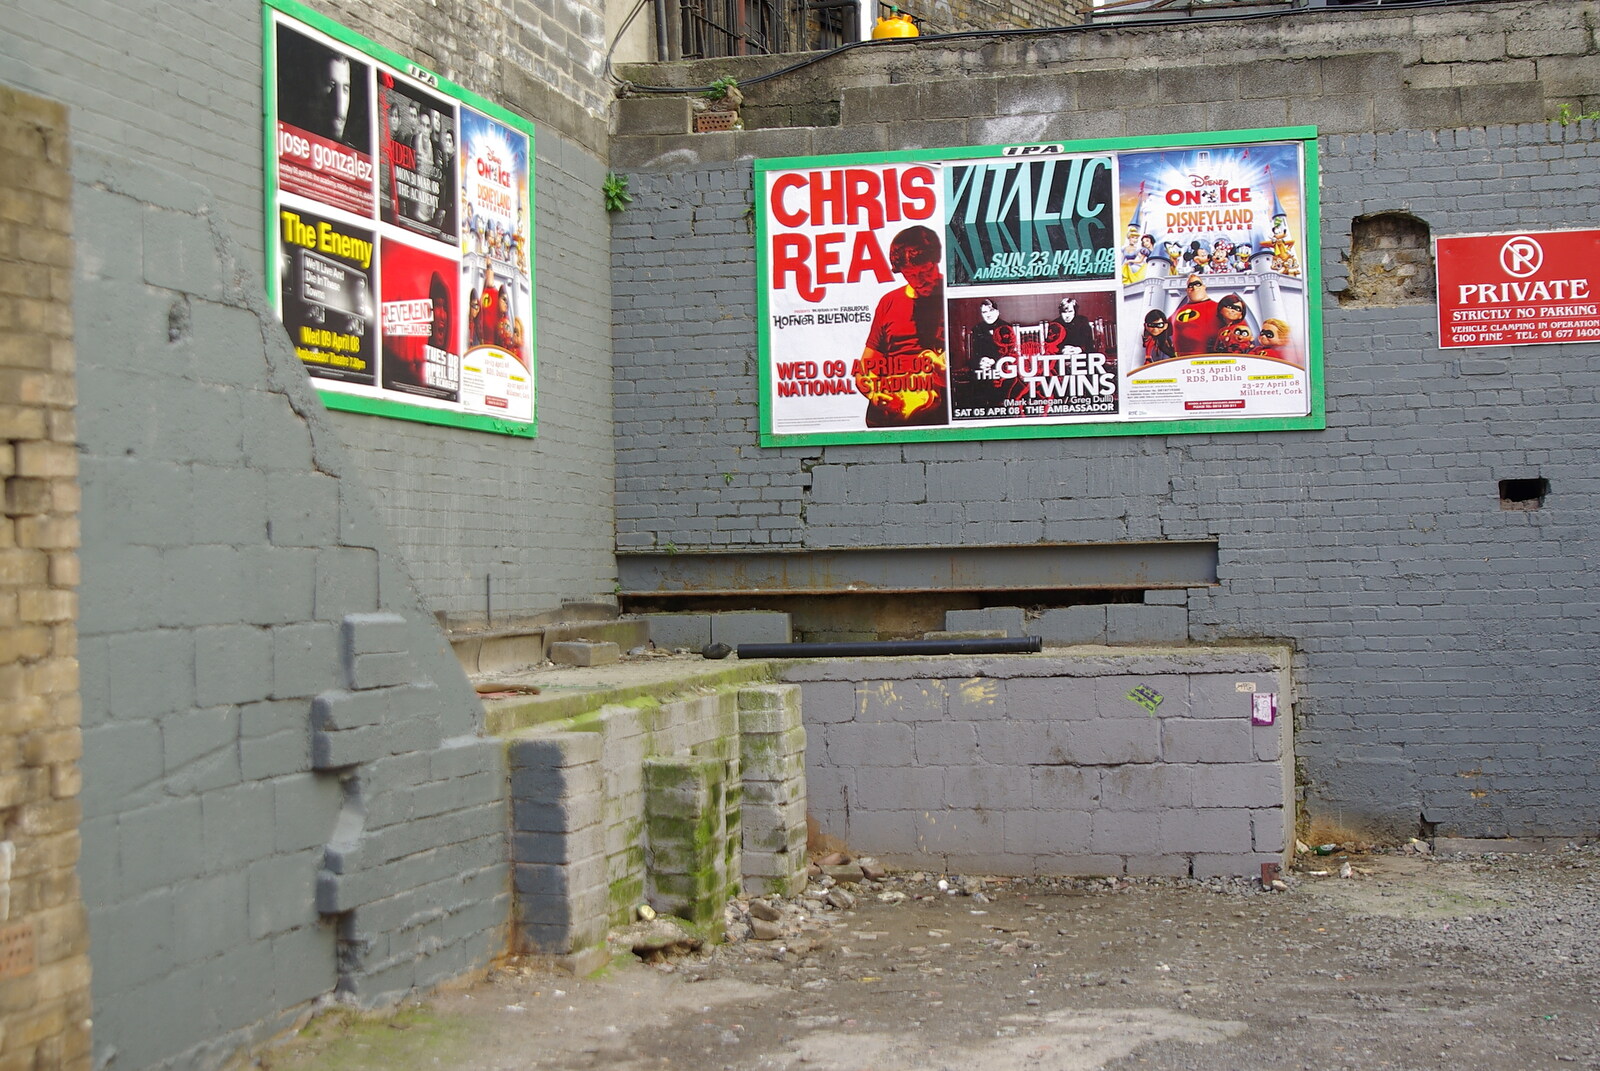 Easter in Dublin, Ireland - 21st March 2008: Music posters